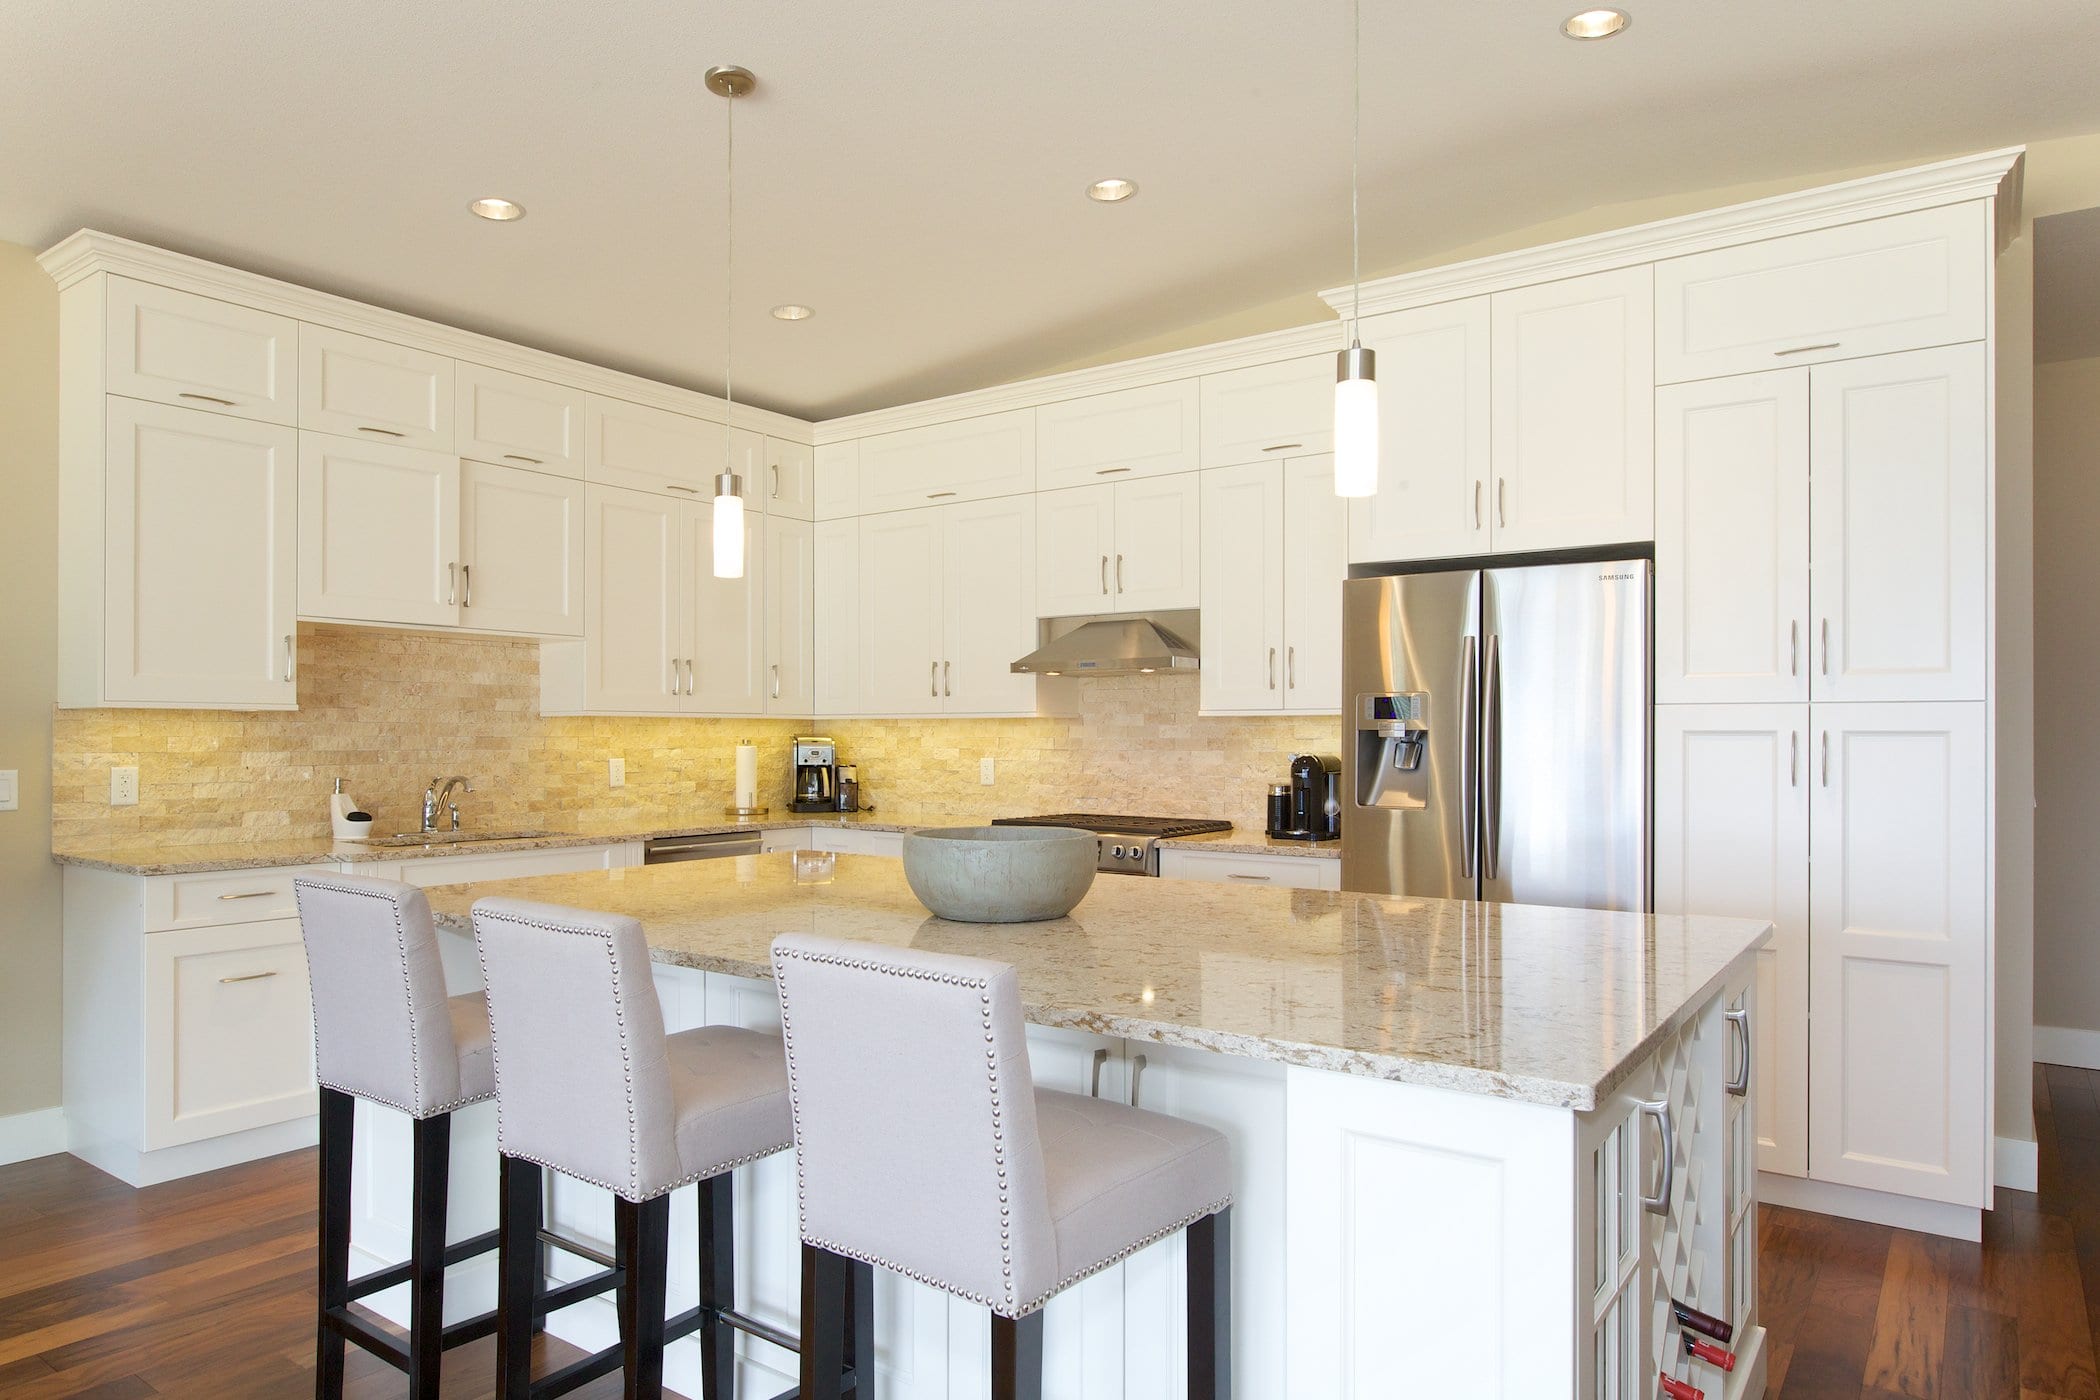 interior shot of west harbour home kitchen with white cabinetry bar chairs fridge and stove